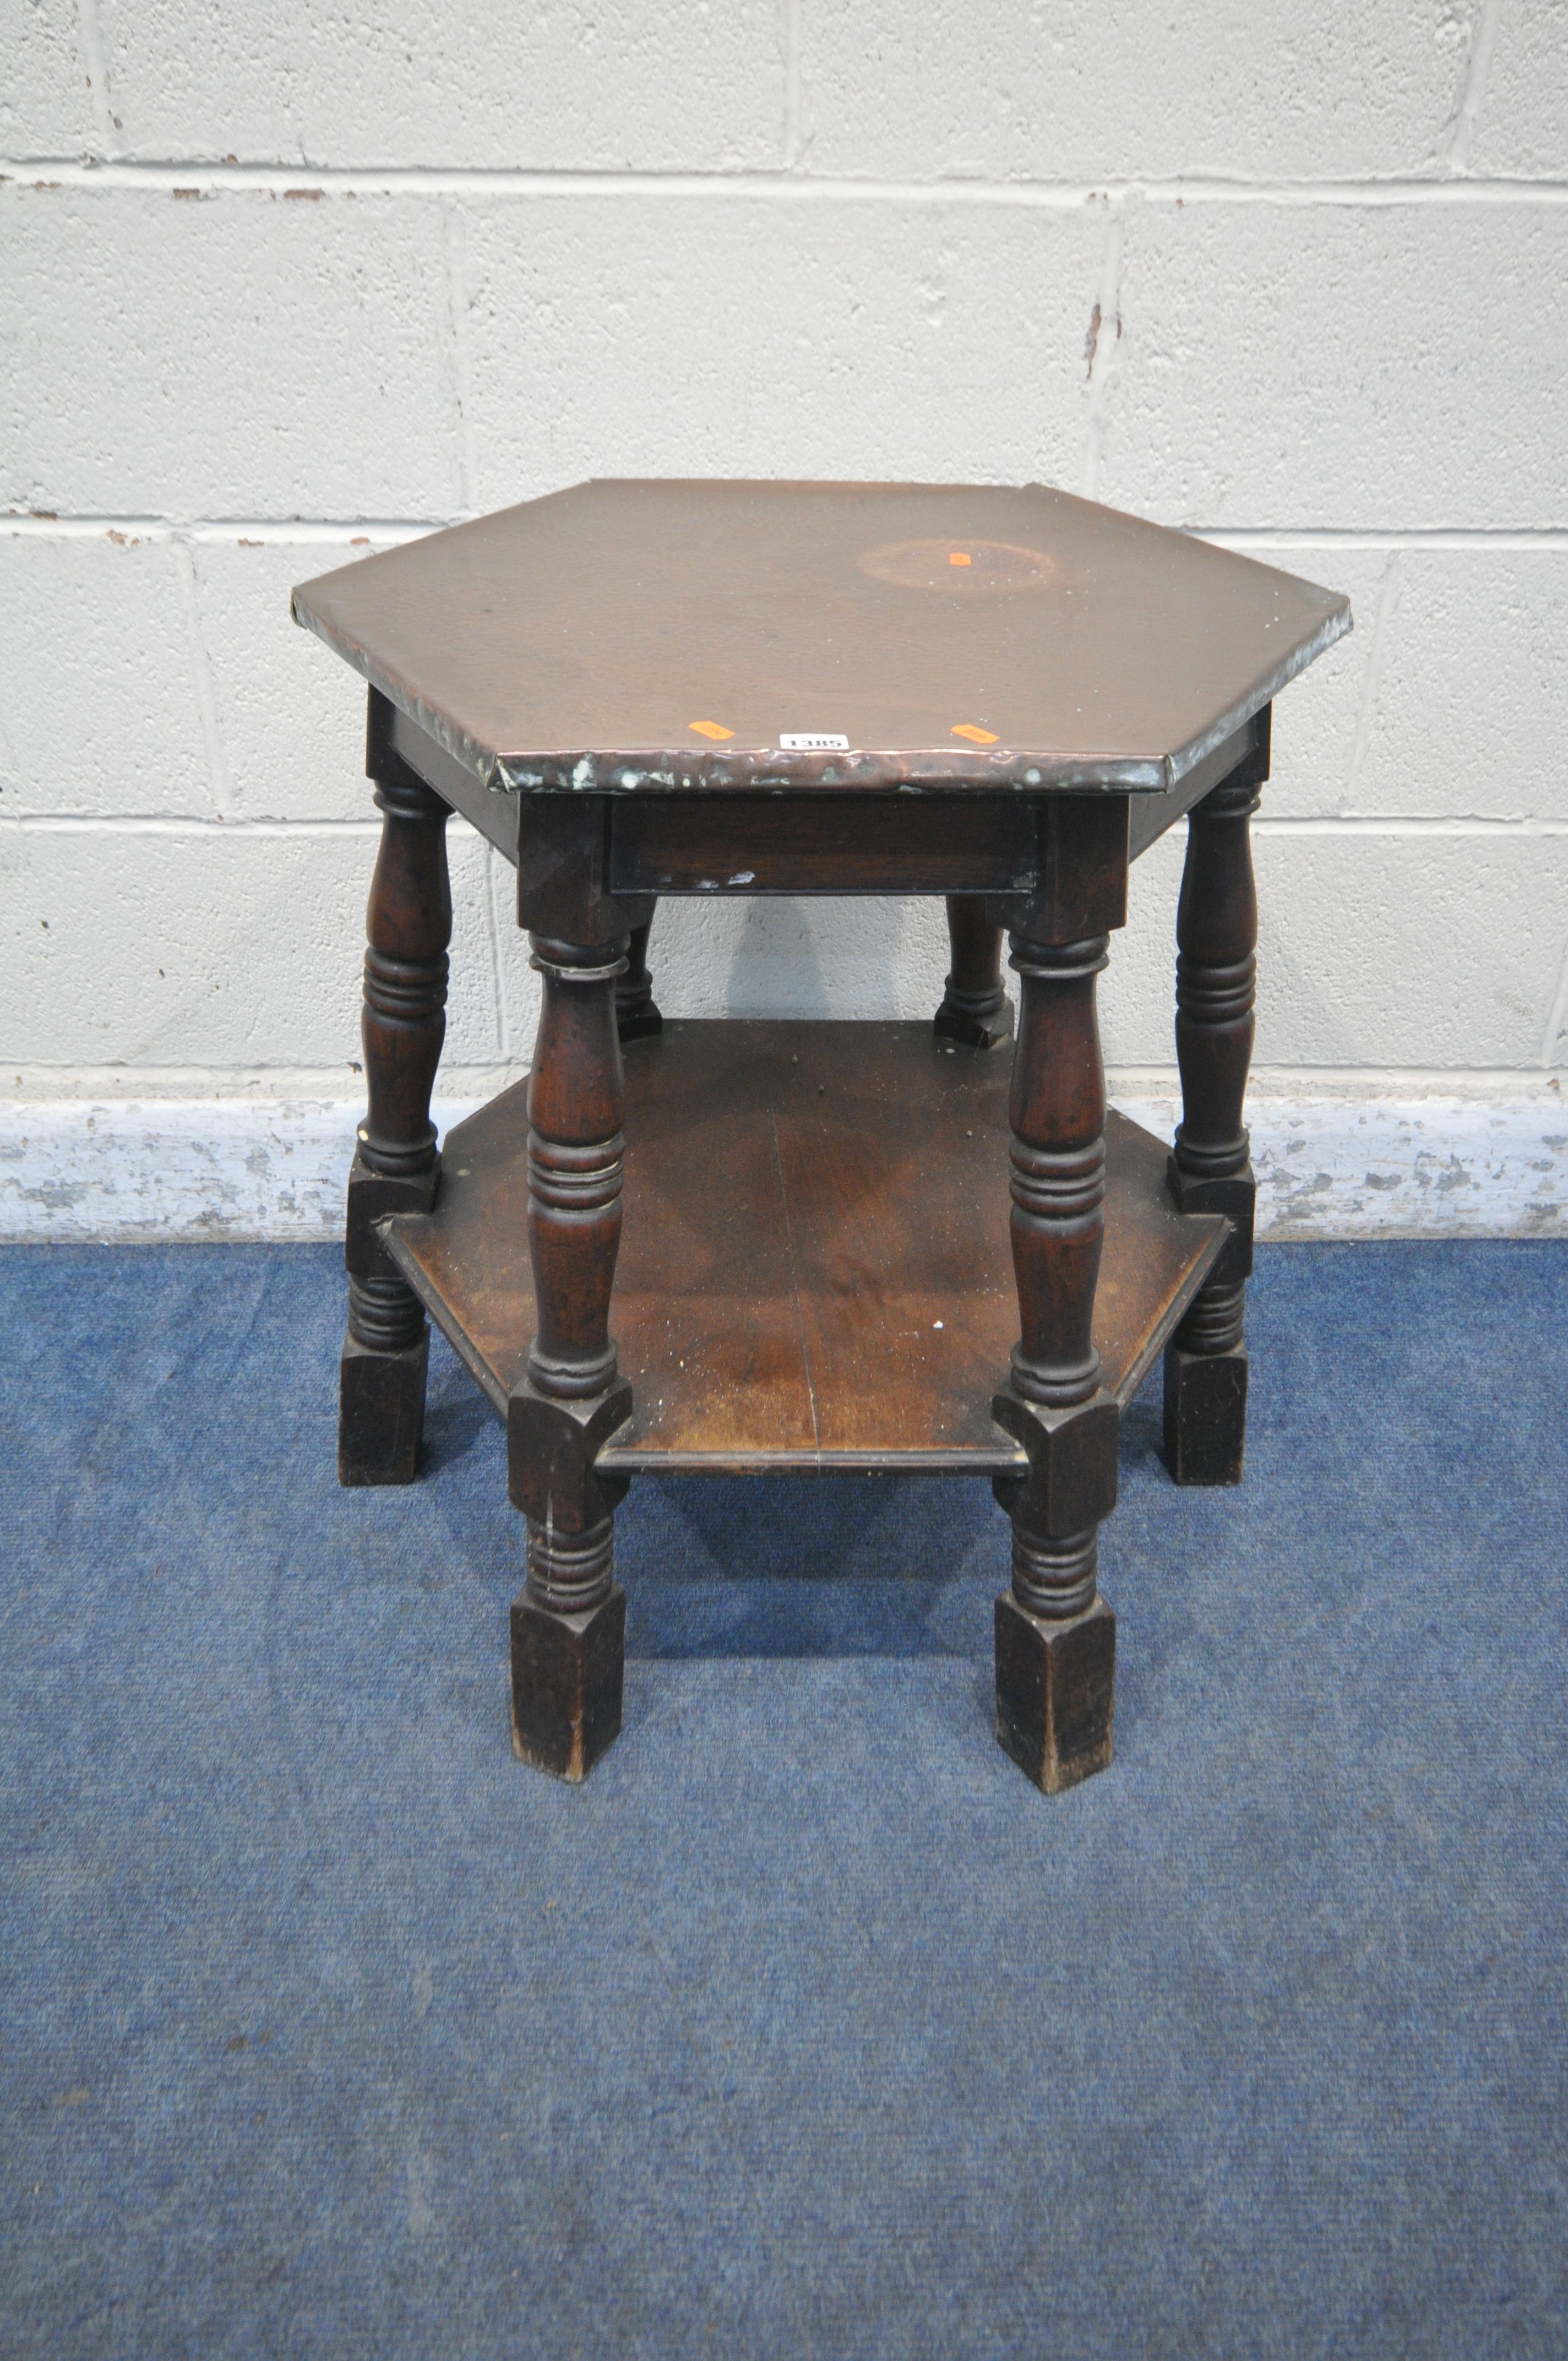 AN ARTS AND CRAFTS OAK HEXAGONAL OCCASIONAL TABLE, with a beaten copper top, raised on block and